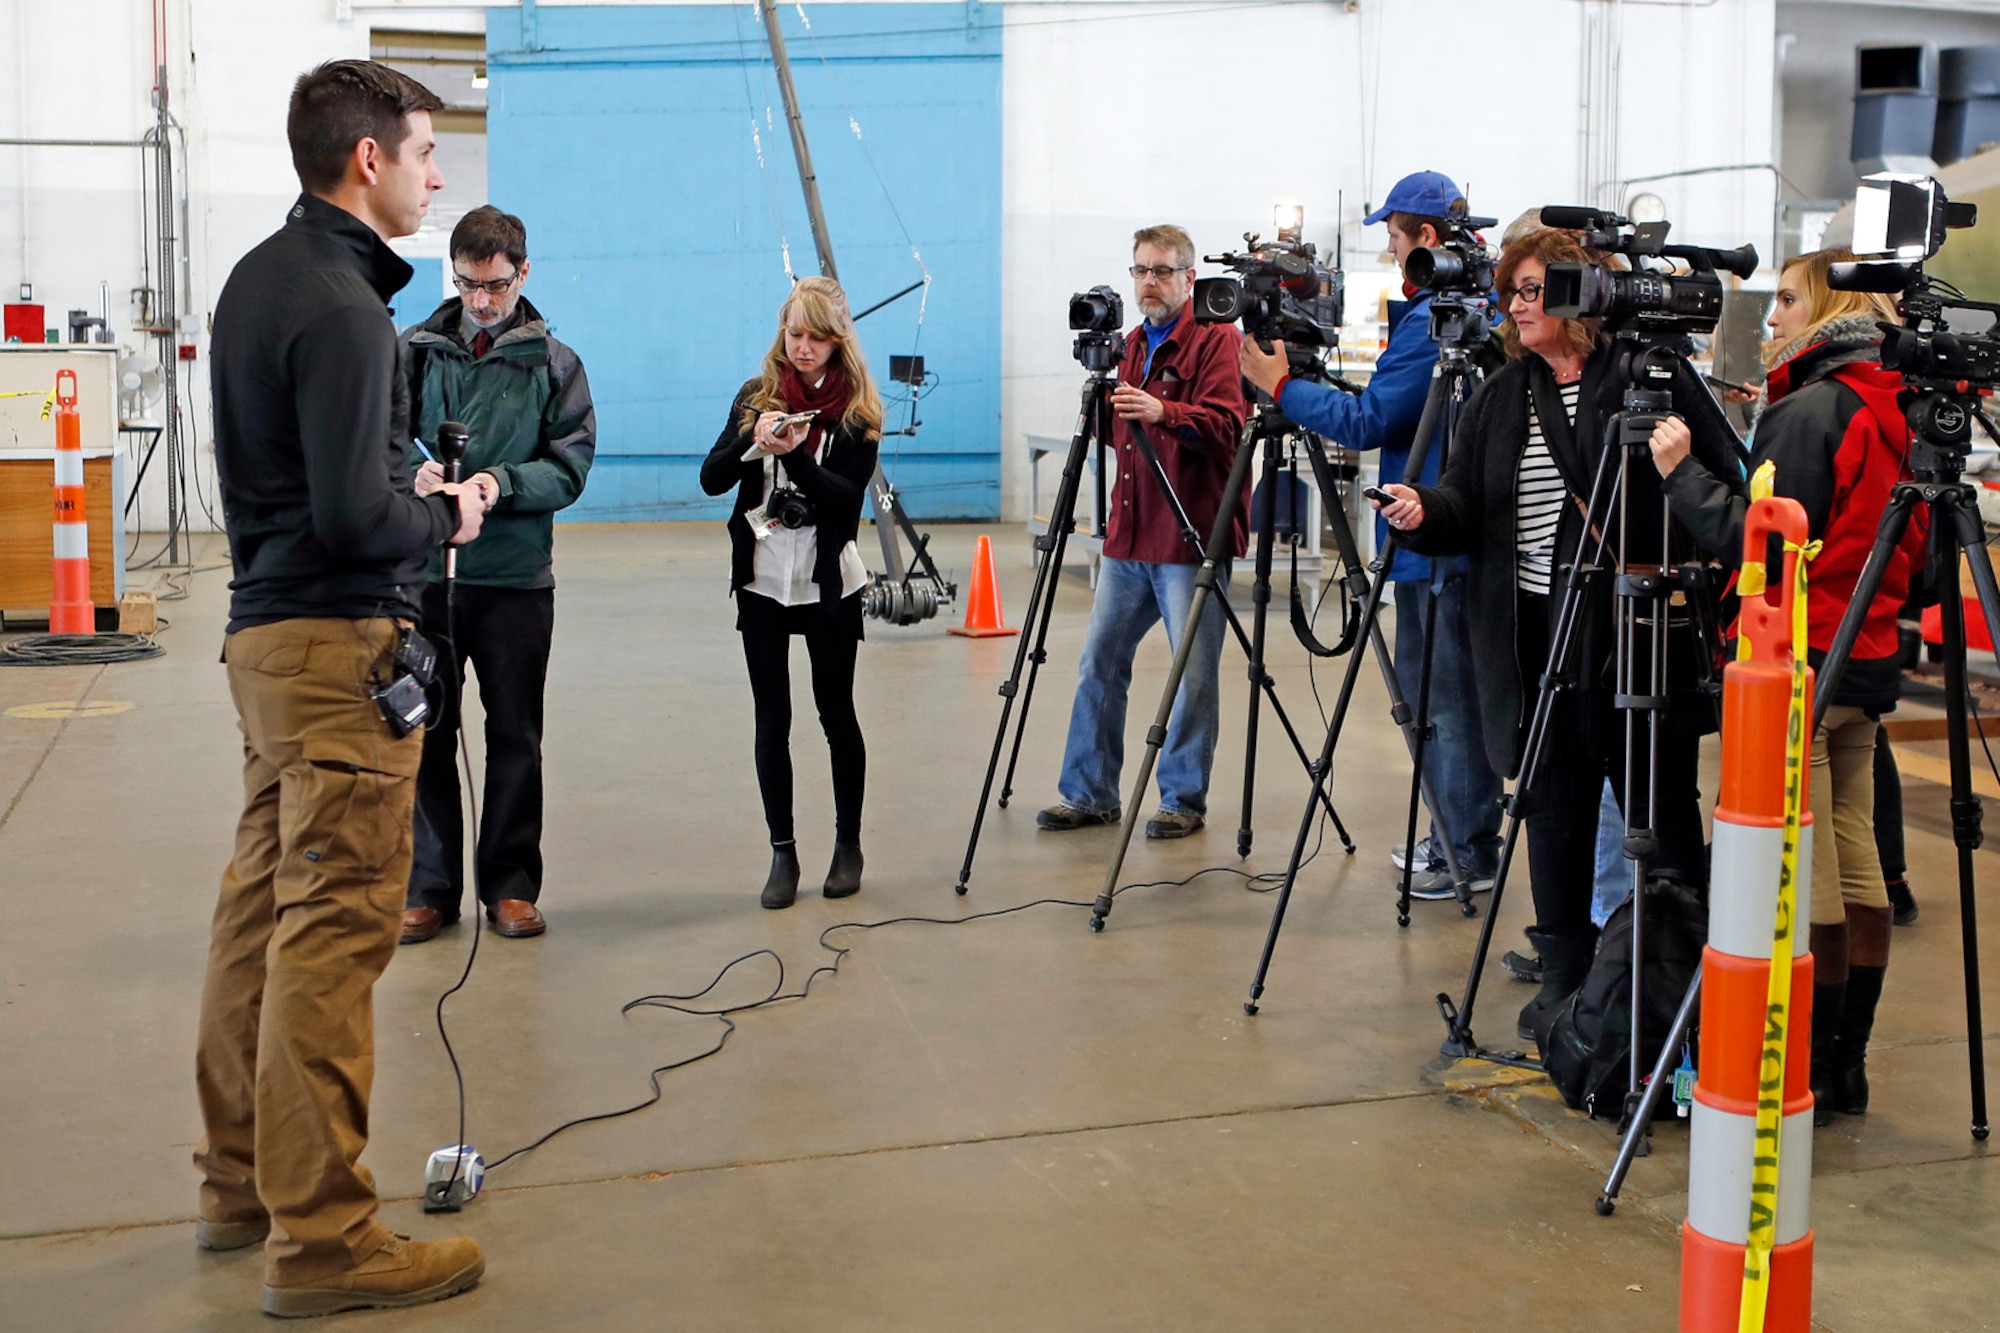 DAYTON, Ohio (01/04/2018) -- National Museum of the U.S. Air Force restoration specialist Casey Simmons speaks with the media about the Boeing B-17F Memphis Belle™. Plans call for the aircraft to be placed on permanent public display in the WWII Gallery here at the National Museum of the U.S. Air Force on May 17, 2018. (U.S. Air Force photo by Don Popp)